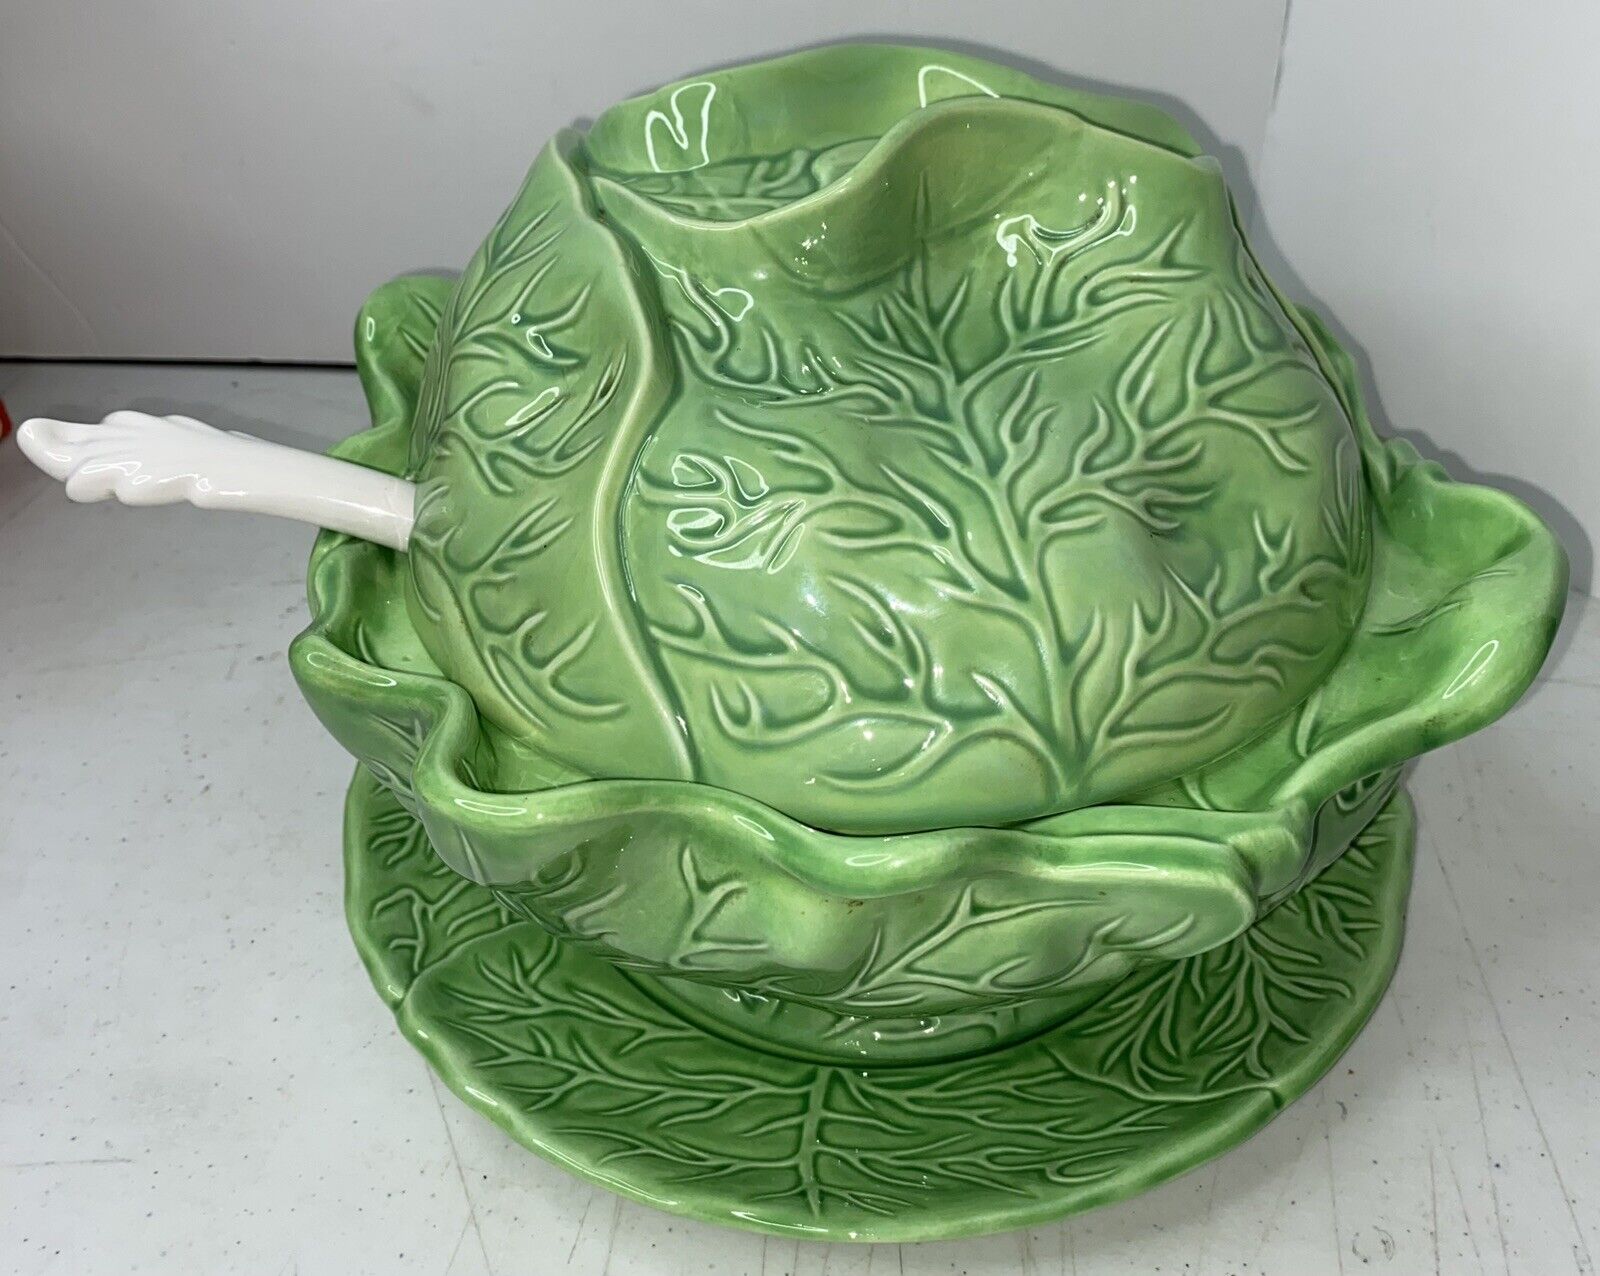 VTG Holland Mold Green Cabbage Tureen 4pc Set W/Ironstone Ladle Drip Plate 